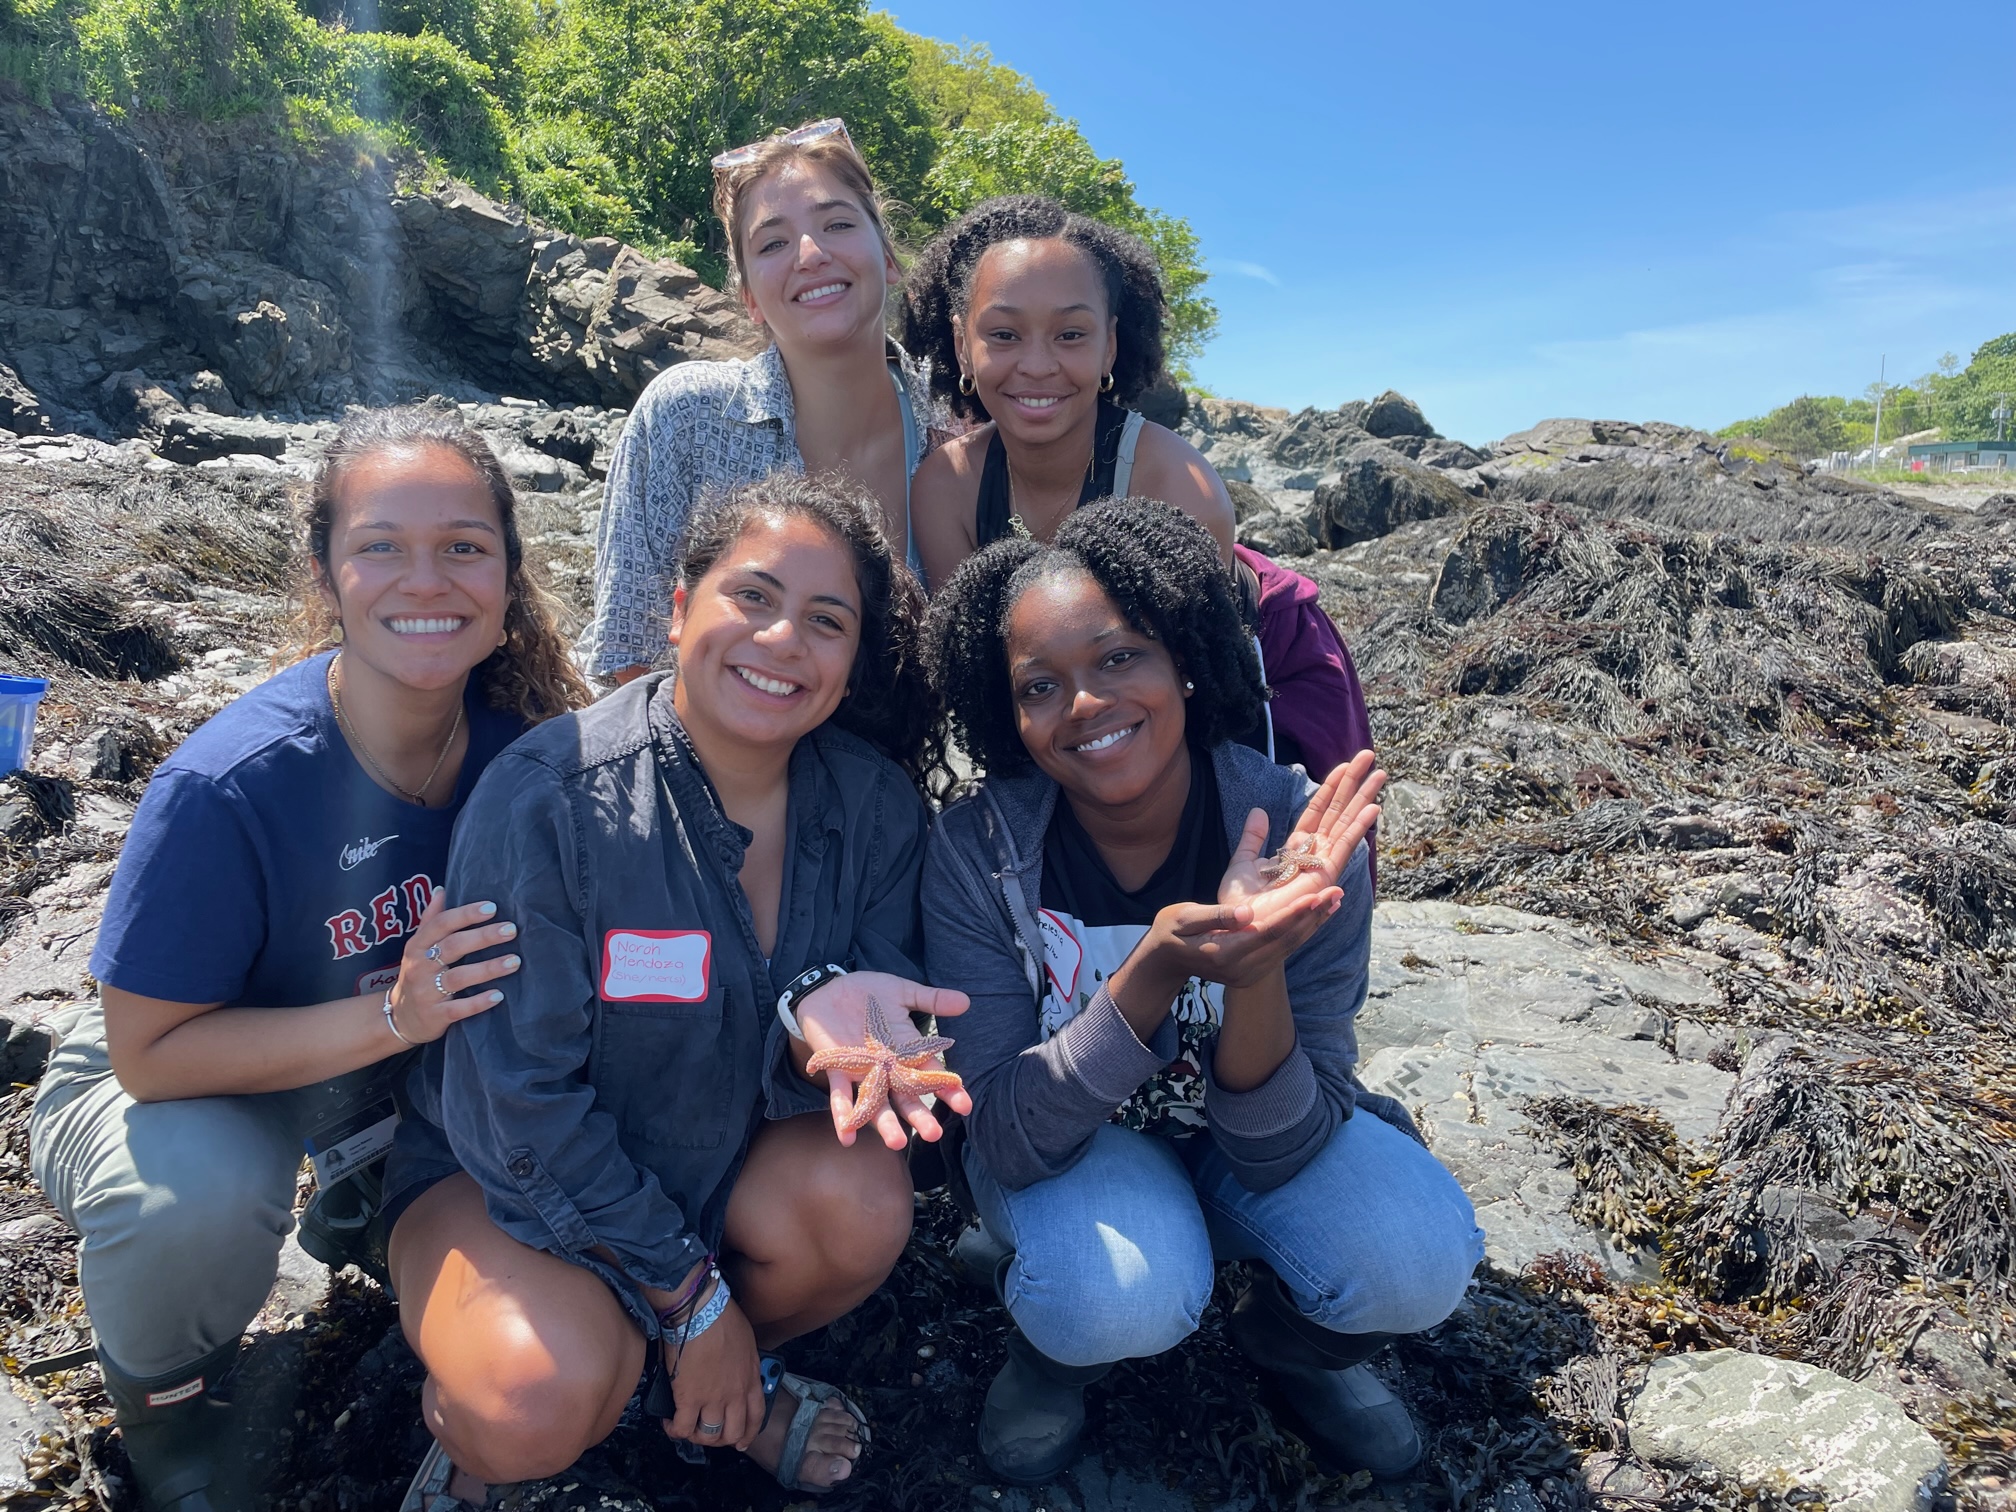 A group of students gathered on a rocky beach. Two are displaying starfish in the palms of their hands.